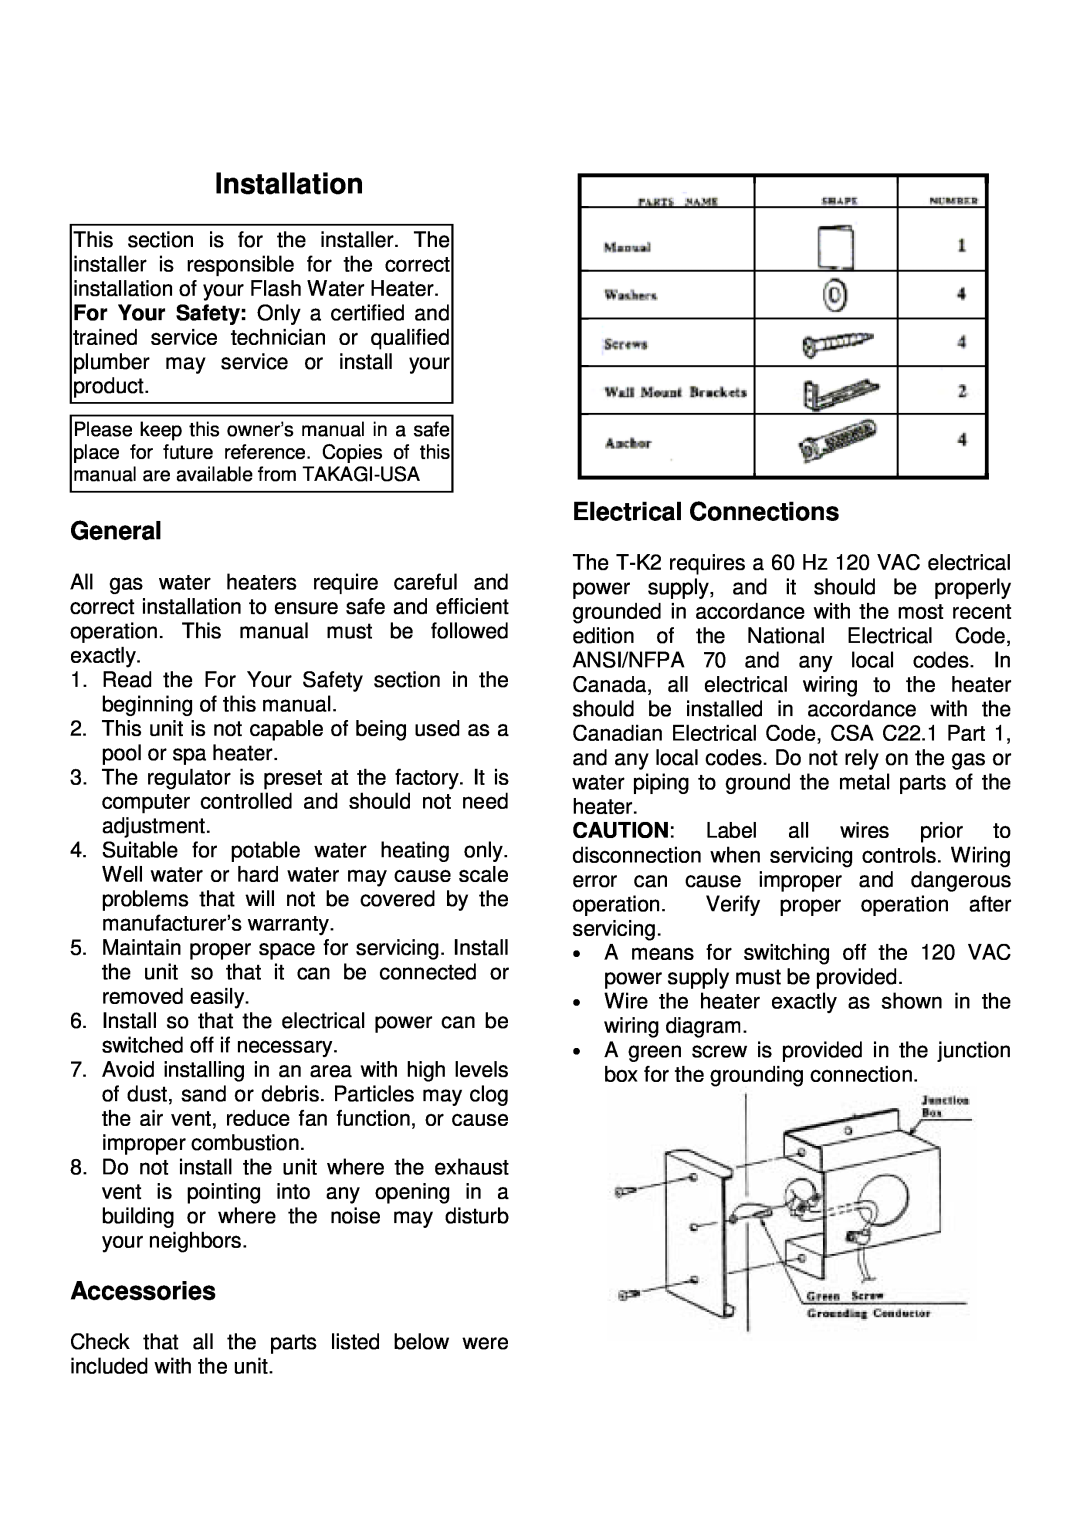 Whirlpool T-K2 installation manual Installation, Accessories, Electrical Connections, General 